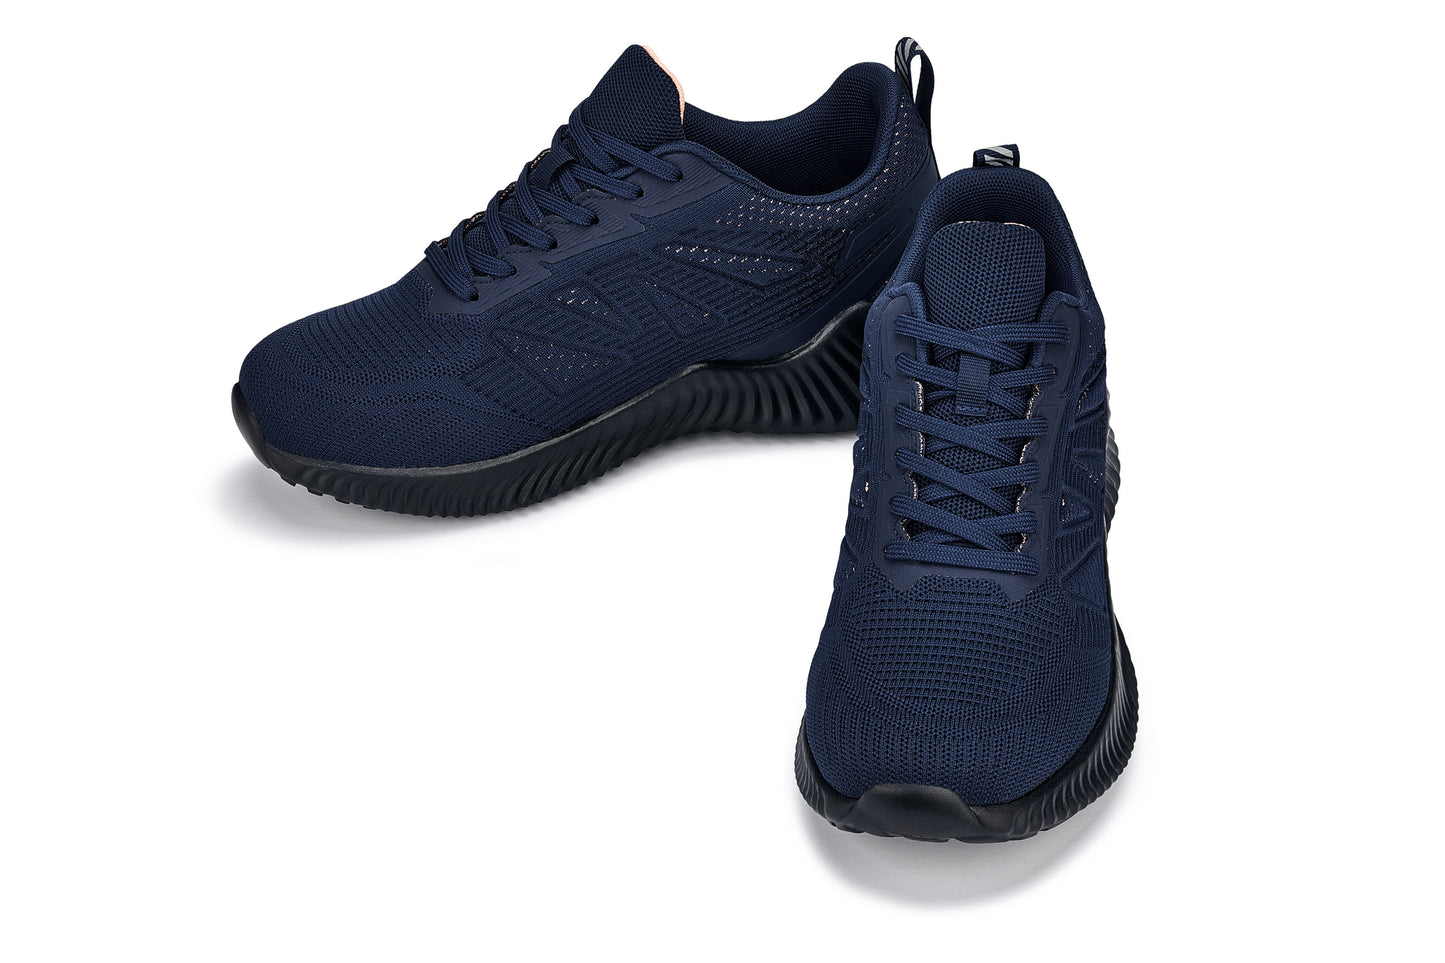 CALTO - Q222 - 2.6 Inches Taller (Navy/Coral) - Lightweight Sporty Sneakers